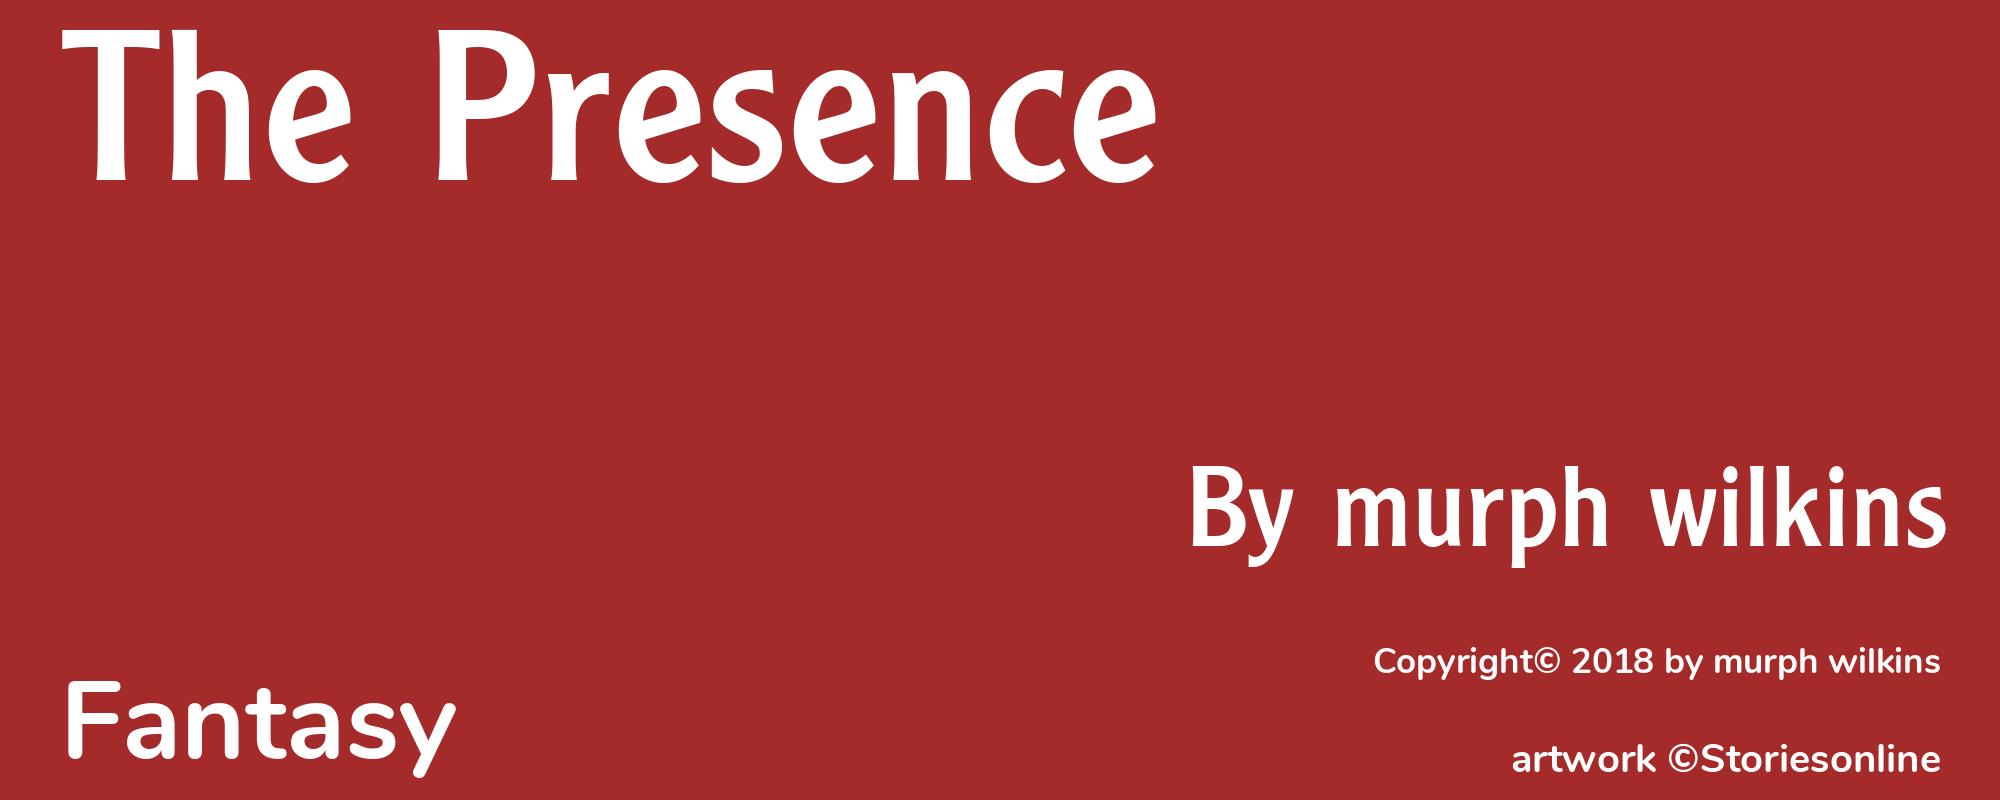 The Presence - Cover